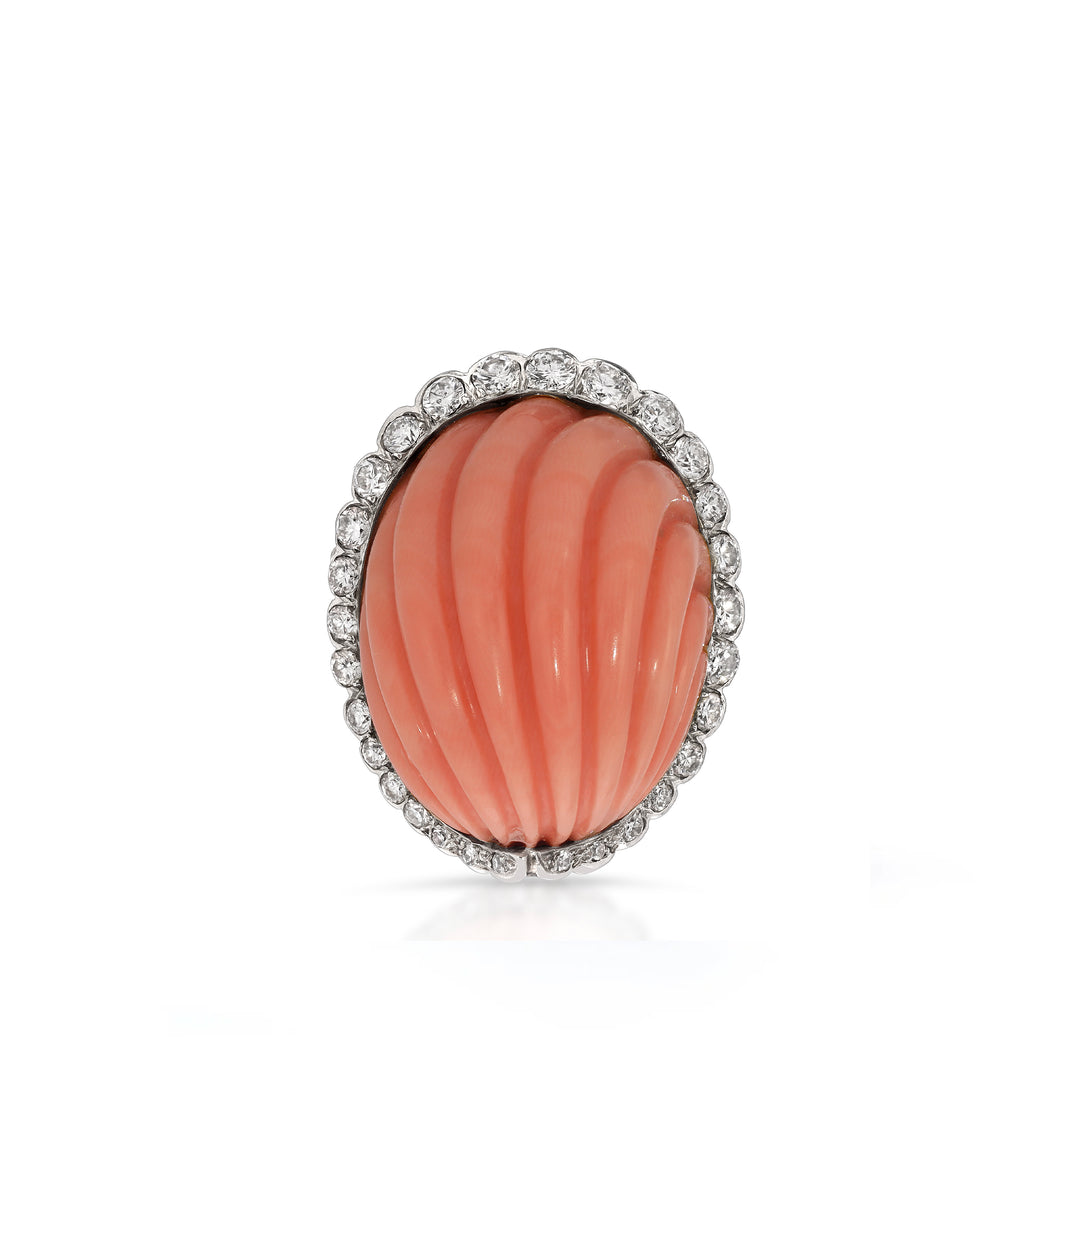 Fluted Angel Skin Coral Diamond Ring in 18K Gold